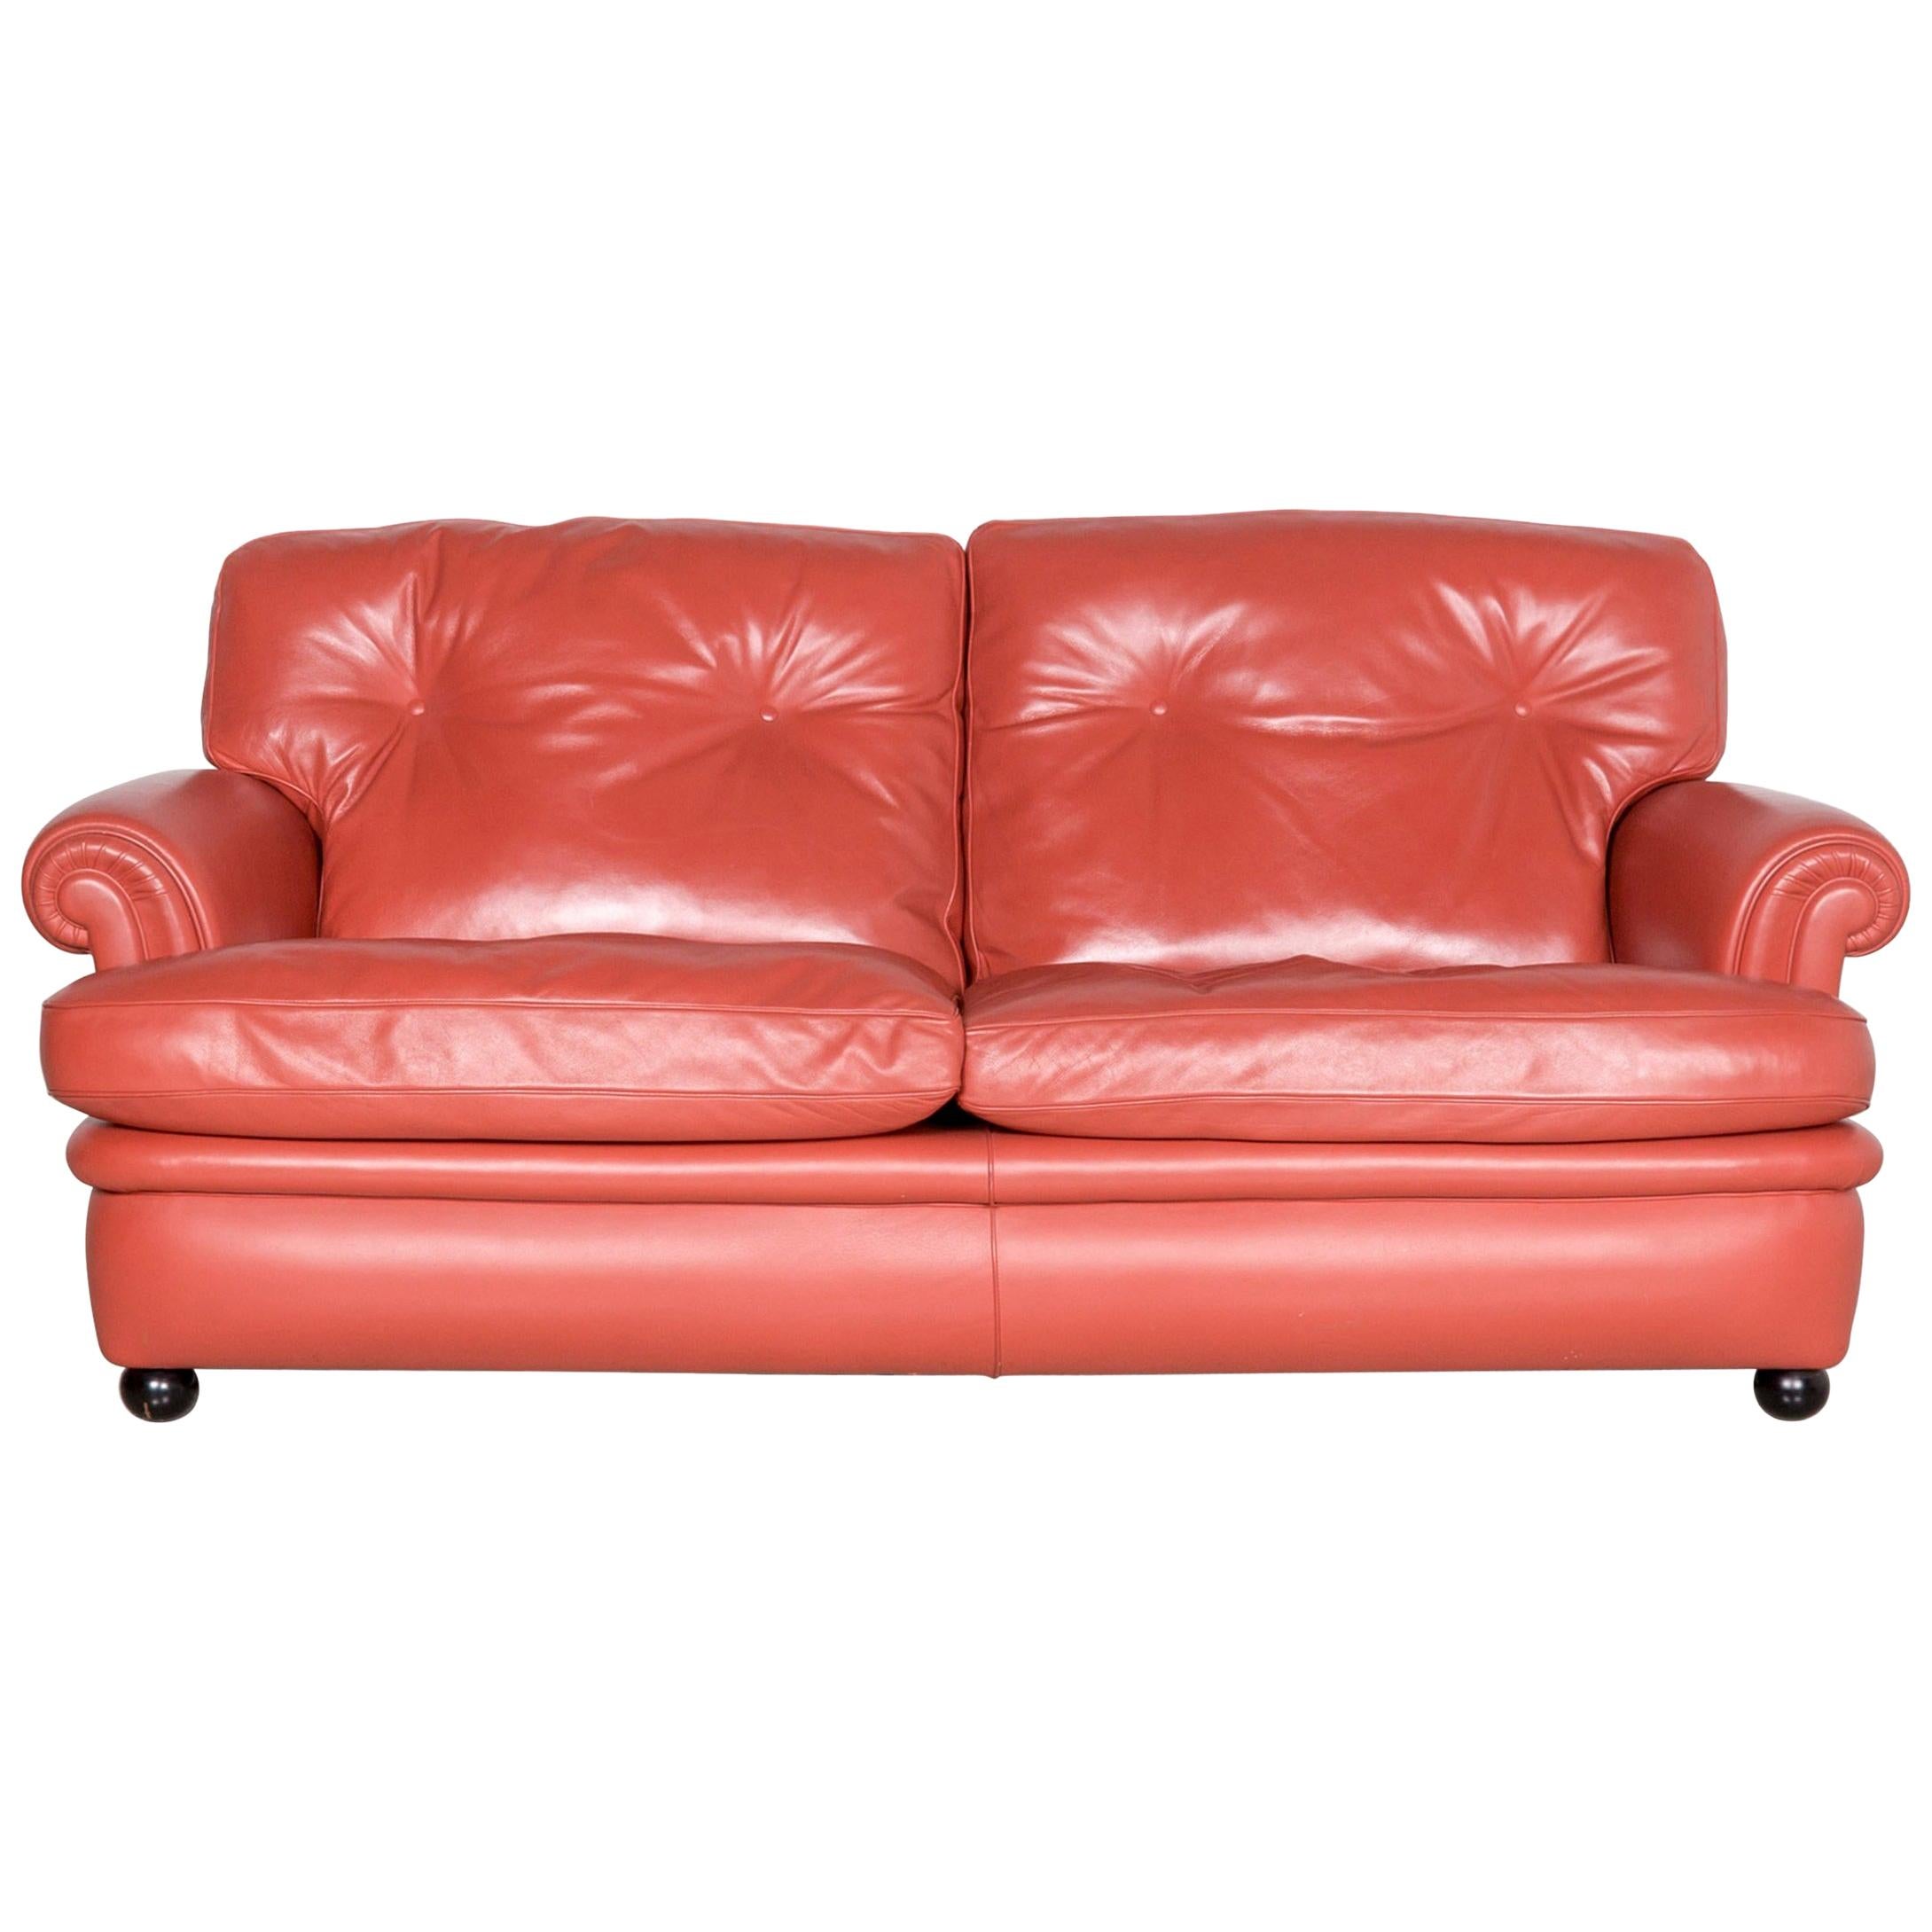 Poltrona Frau Dream on Designer Leather Two-Seat Couch Orange For Sale